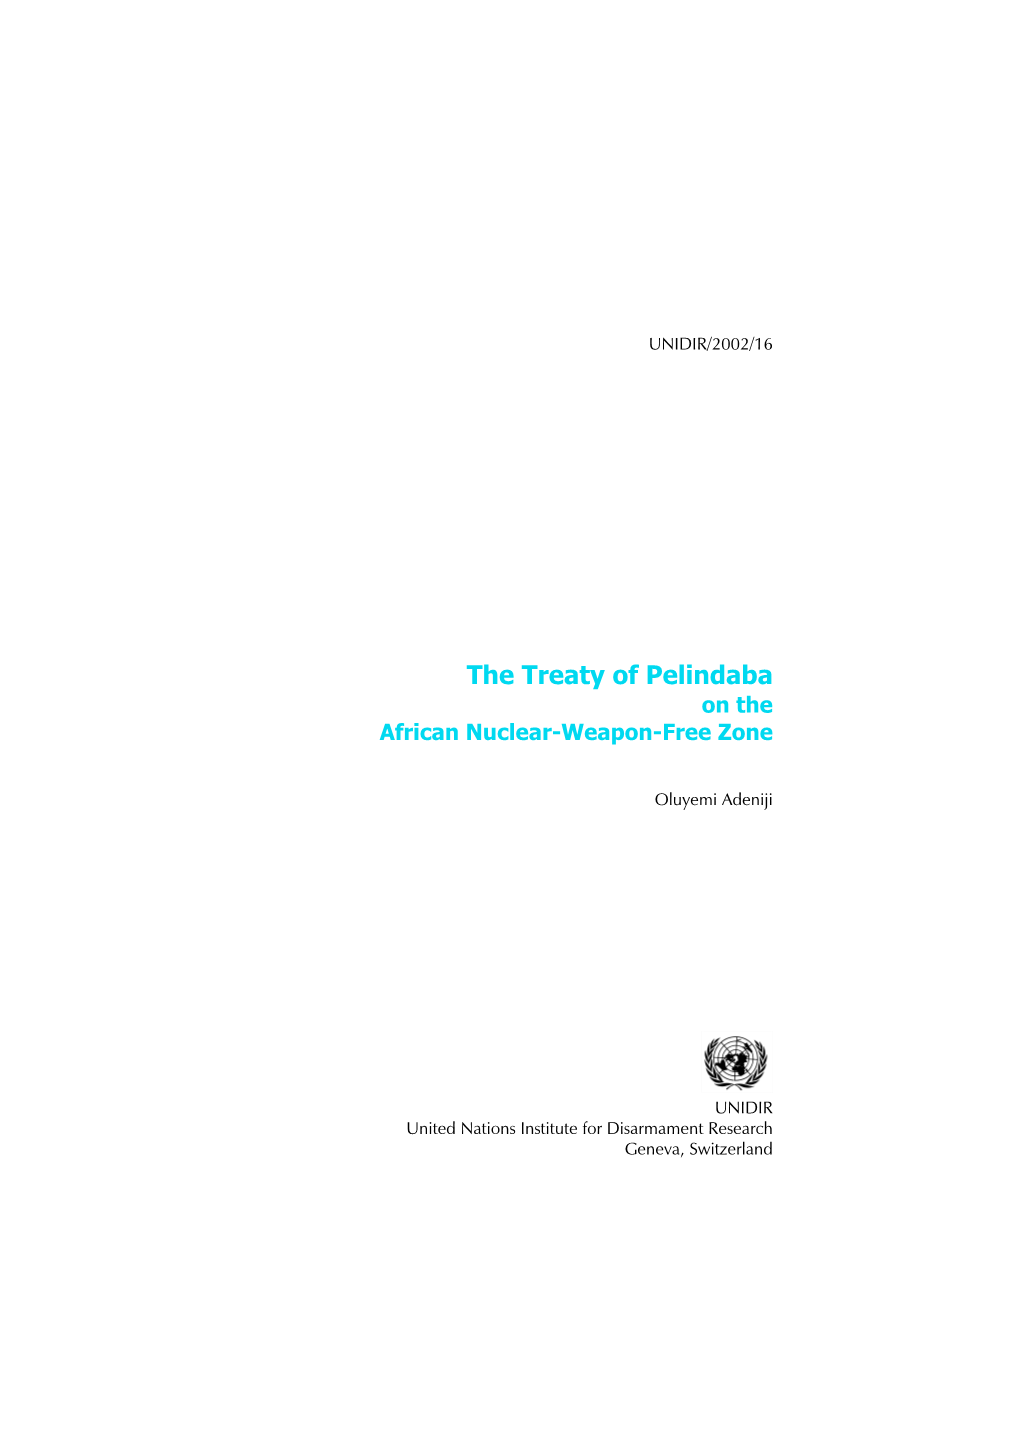 The Treaty of Pelindaba on the African Nuclear-Weapon-Free Zone